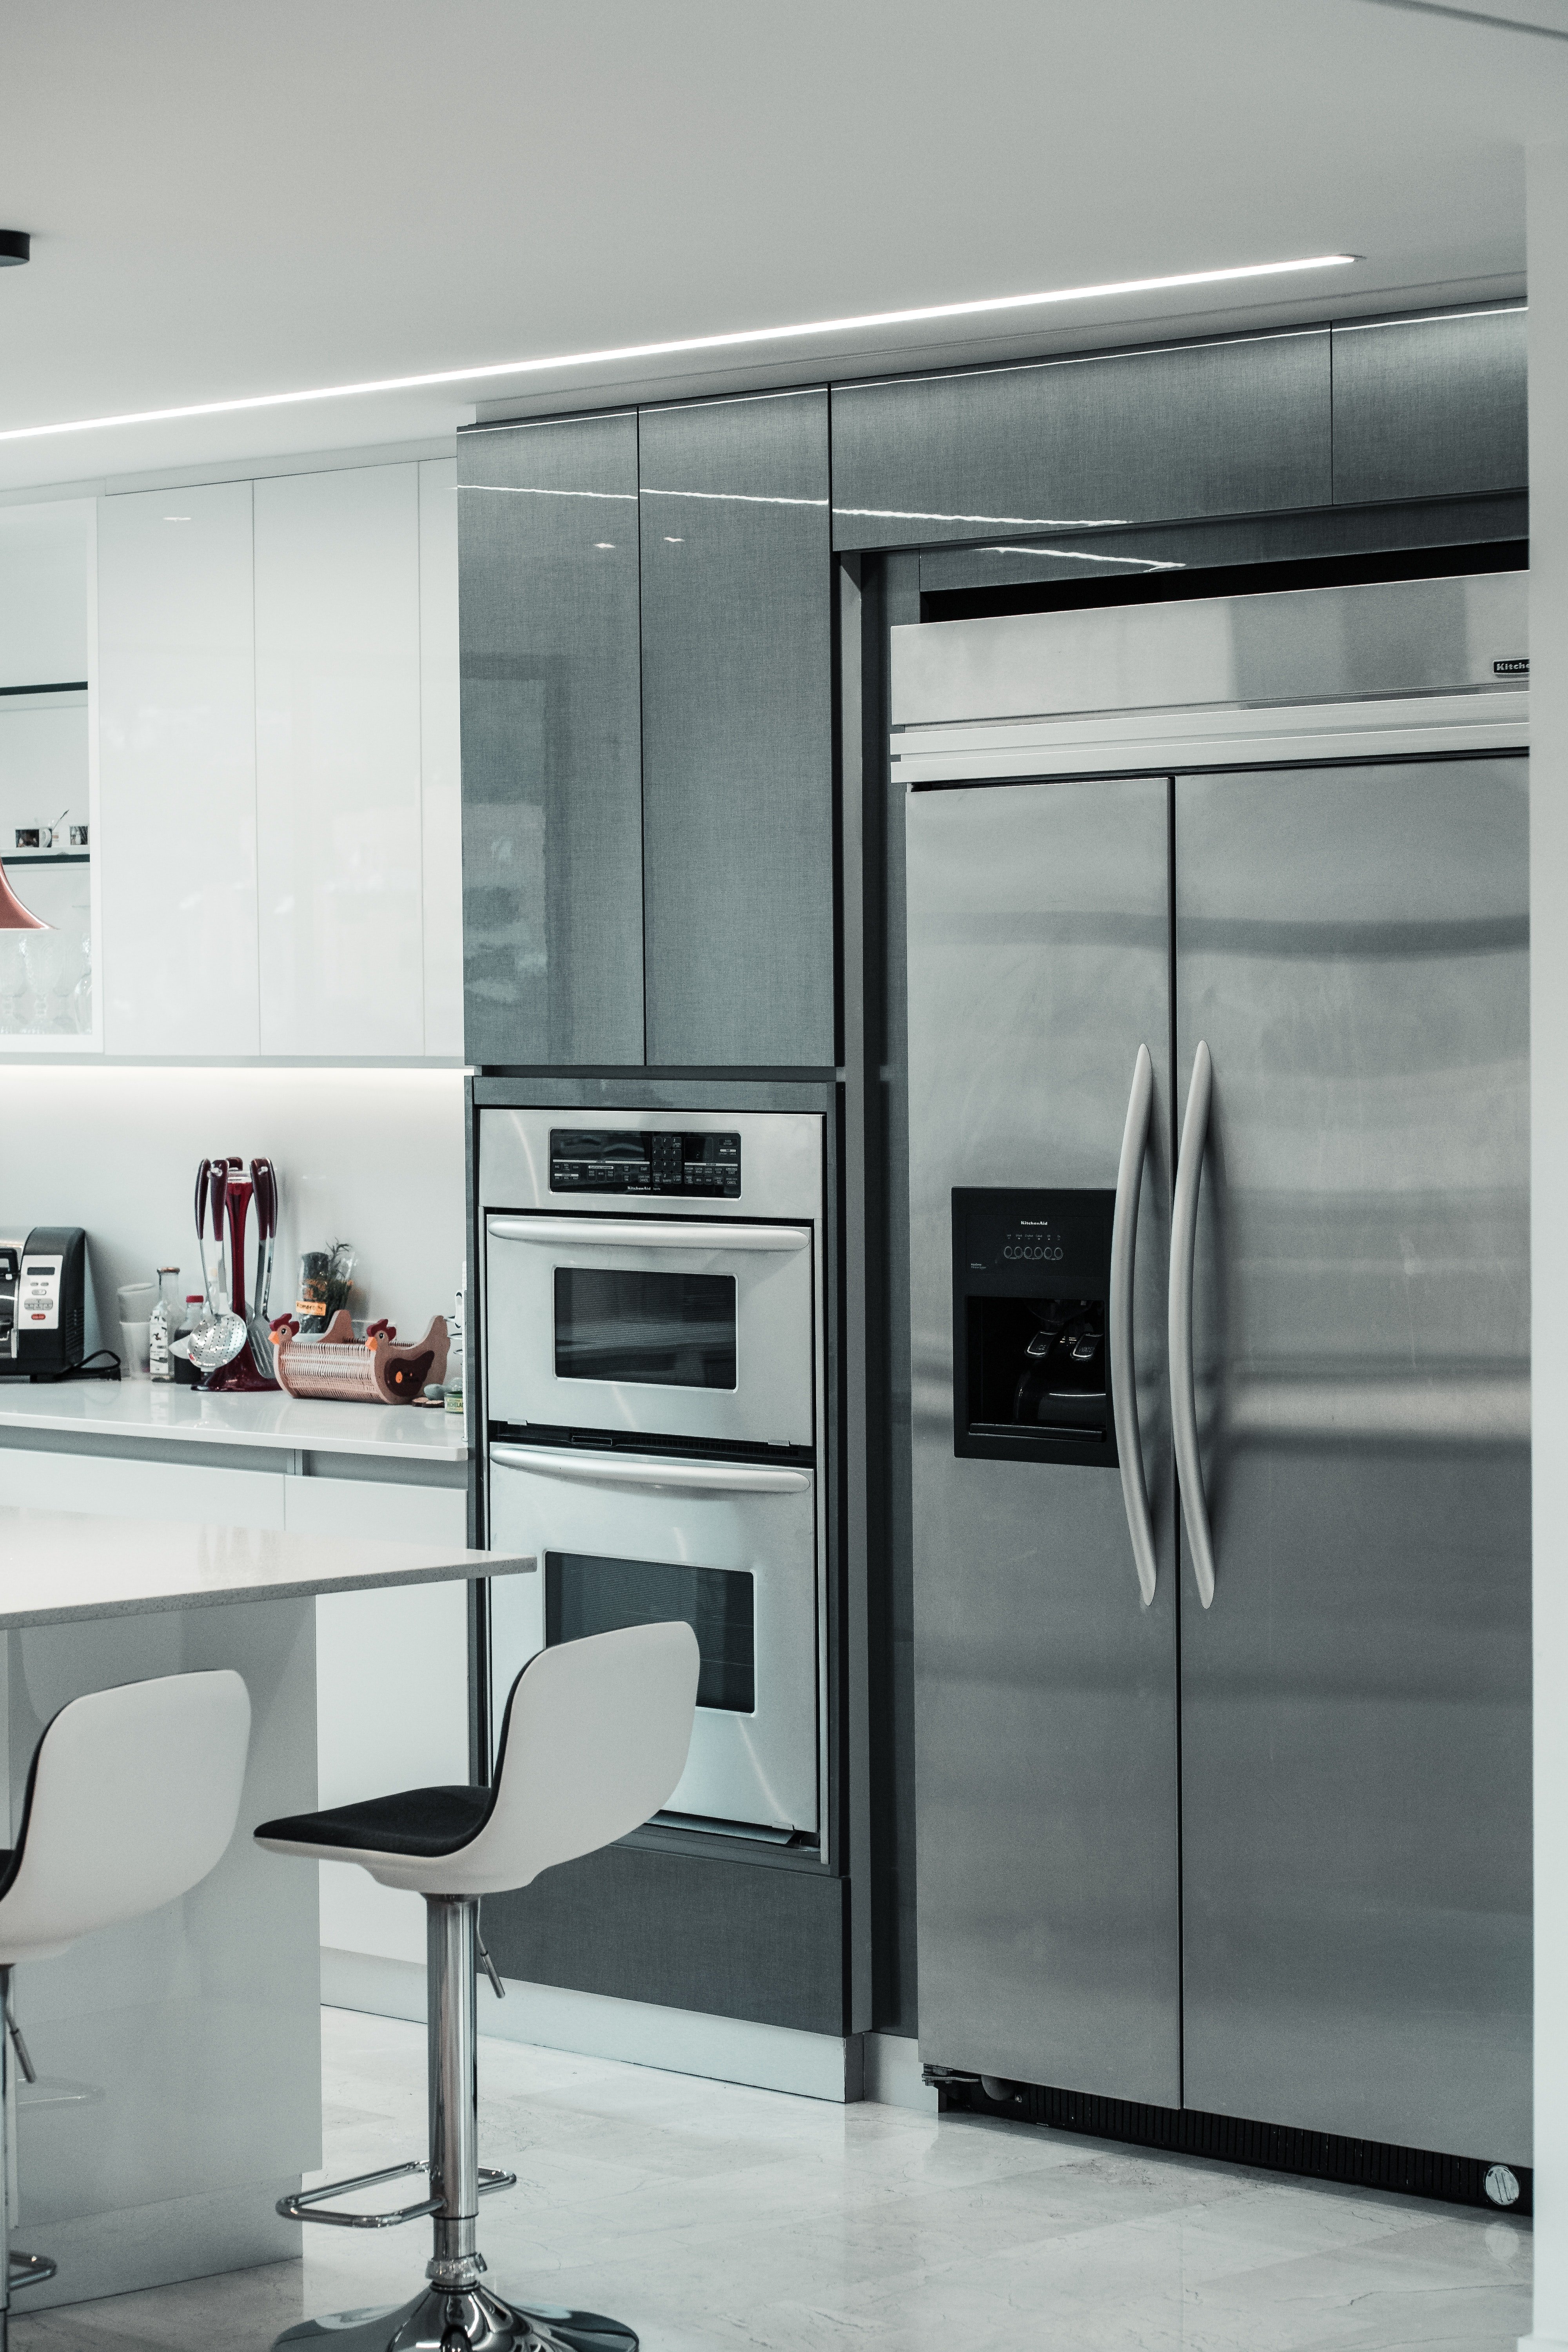 Pictured - A kitchen with a side by side refrigerator | Source: Pexels